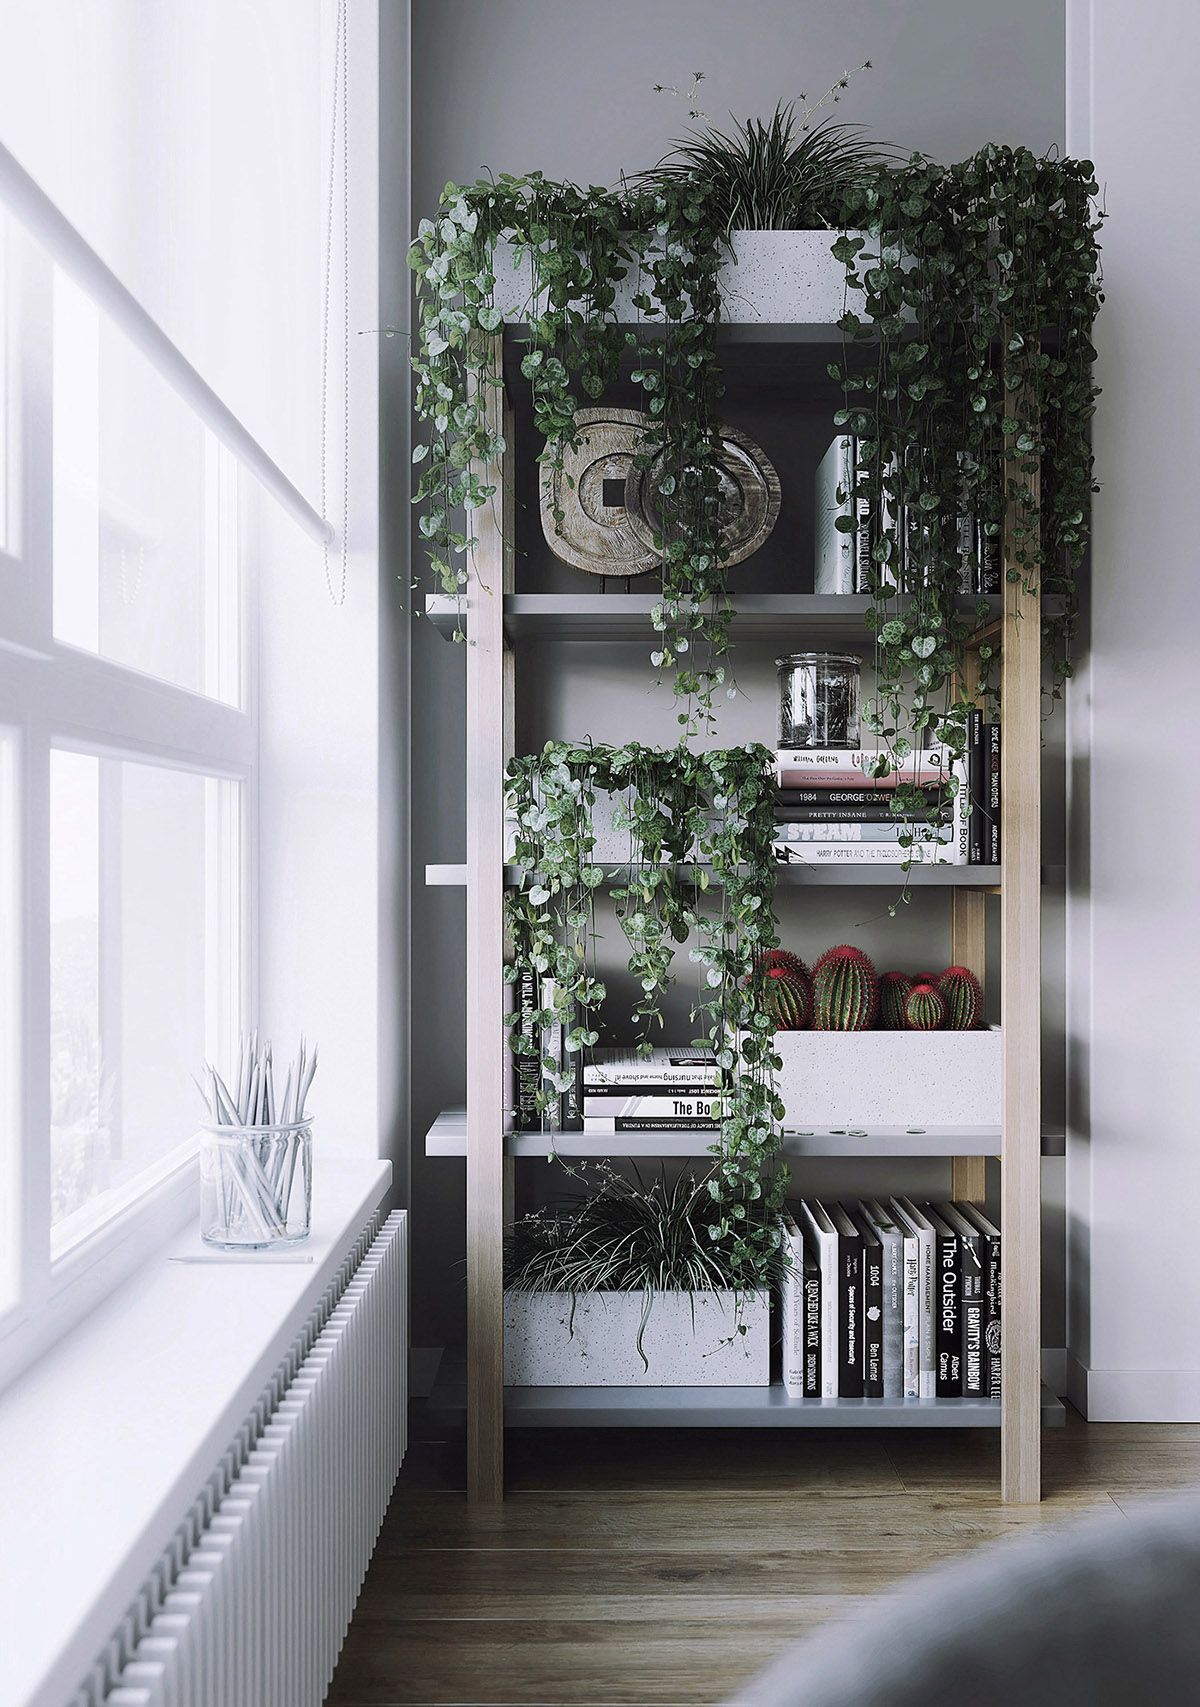 Interiors That Use Plants As Part Of The Palette -   17 planting Home interiors
 ideas